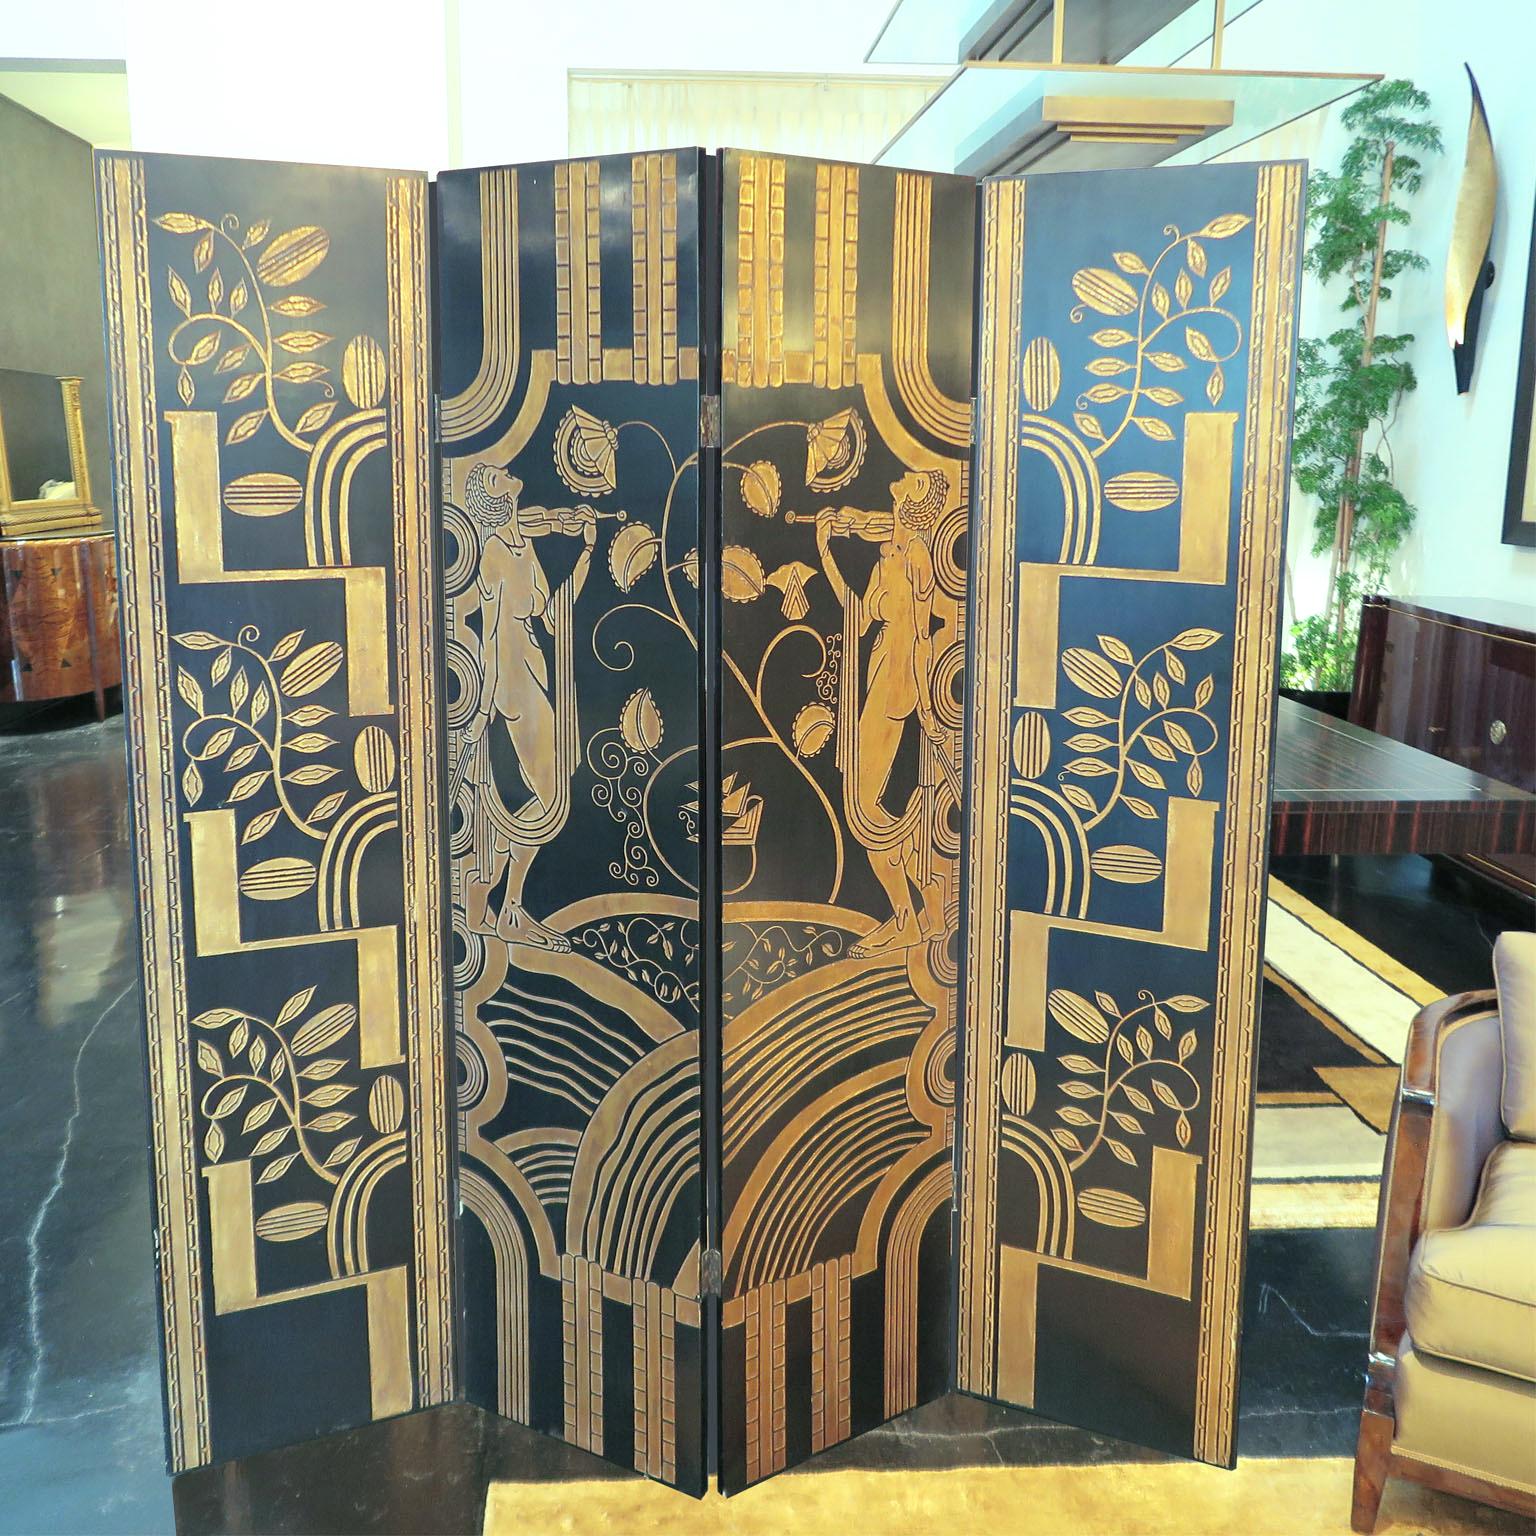 French Art Deco four panel screen. Matte black panels engraved with stylized nymph and nature motifs. Engravings in distressed gold leaf. Backside is matte black (no engravings). Original condition.
Hinges can also be removed and panels can be